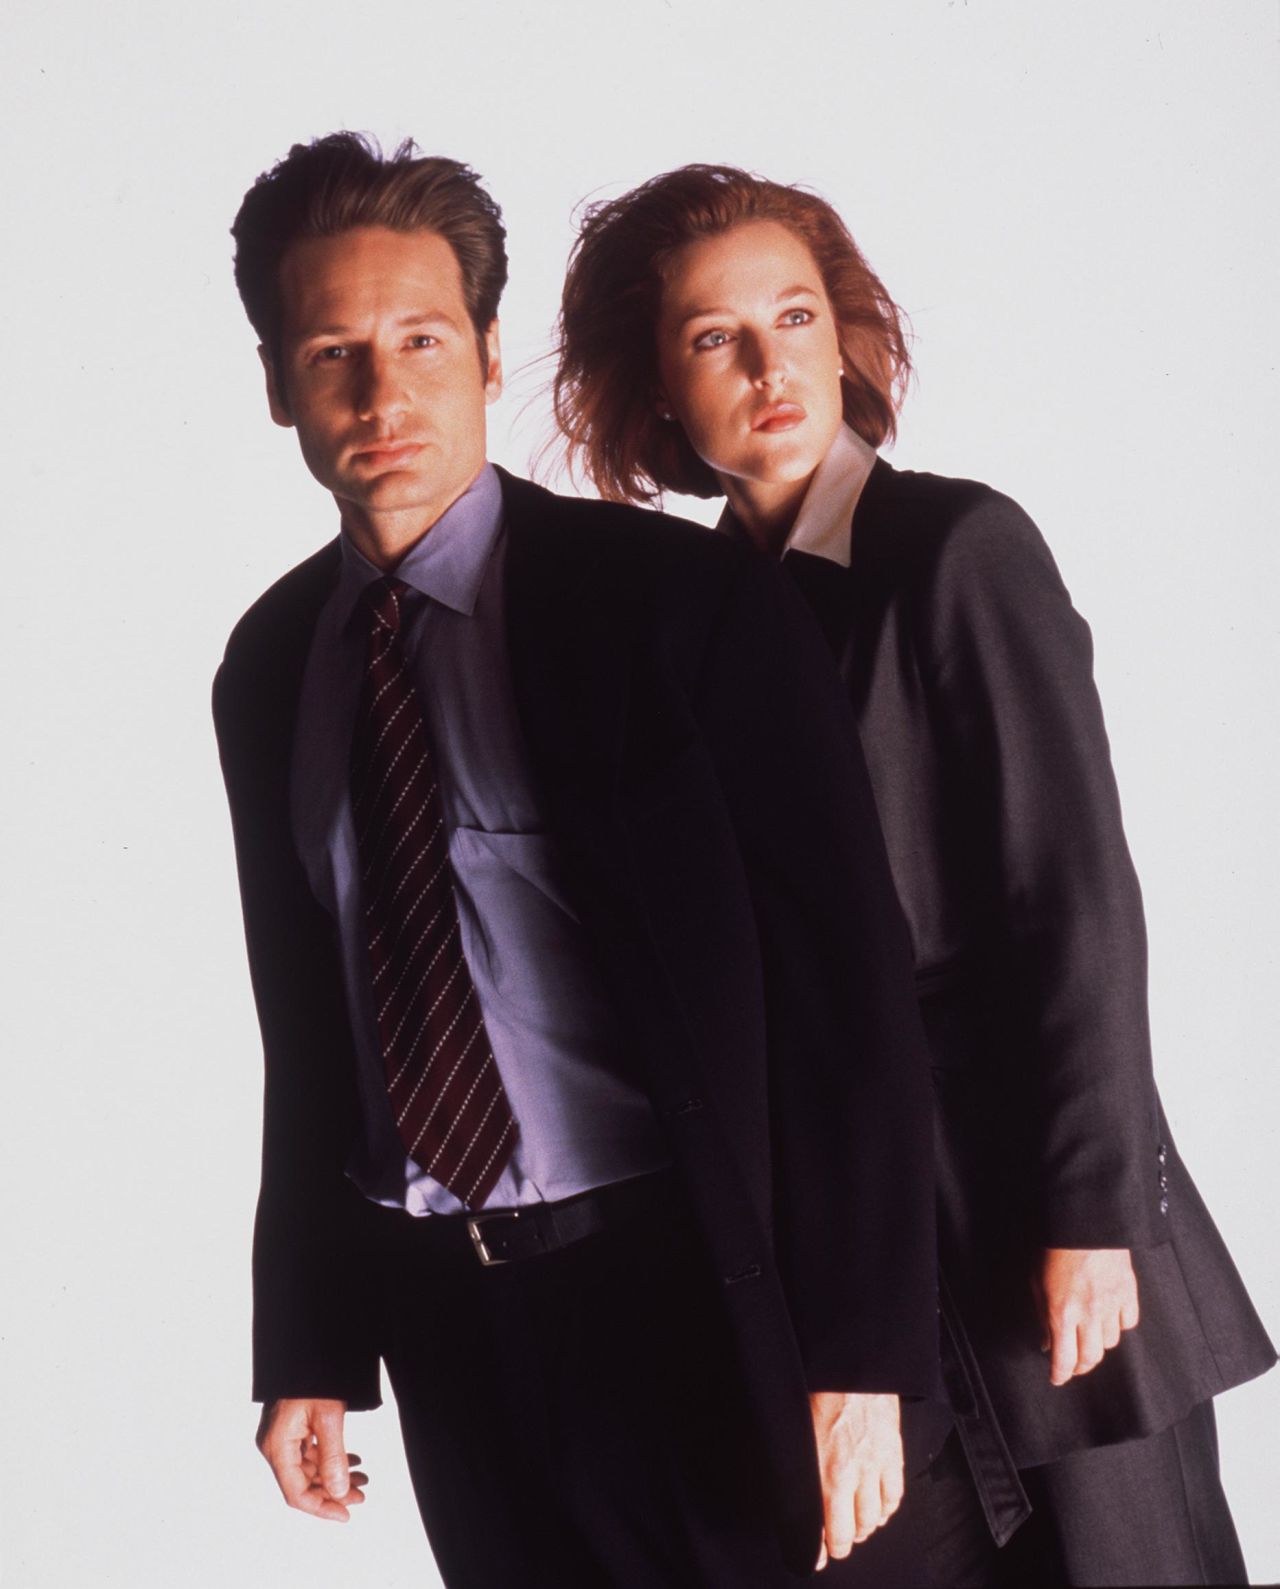 Long after many viewers cared -- in large part due to the departure of David Duchovny in season 7 -- "X-Files" got Scully and Mulder back together. We learned that aliens would colonize Earth and the world was set to end on December 22, 2012 (phew, that was close).  